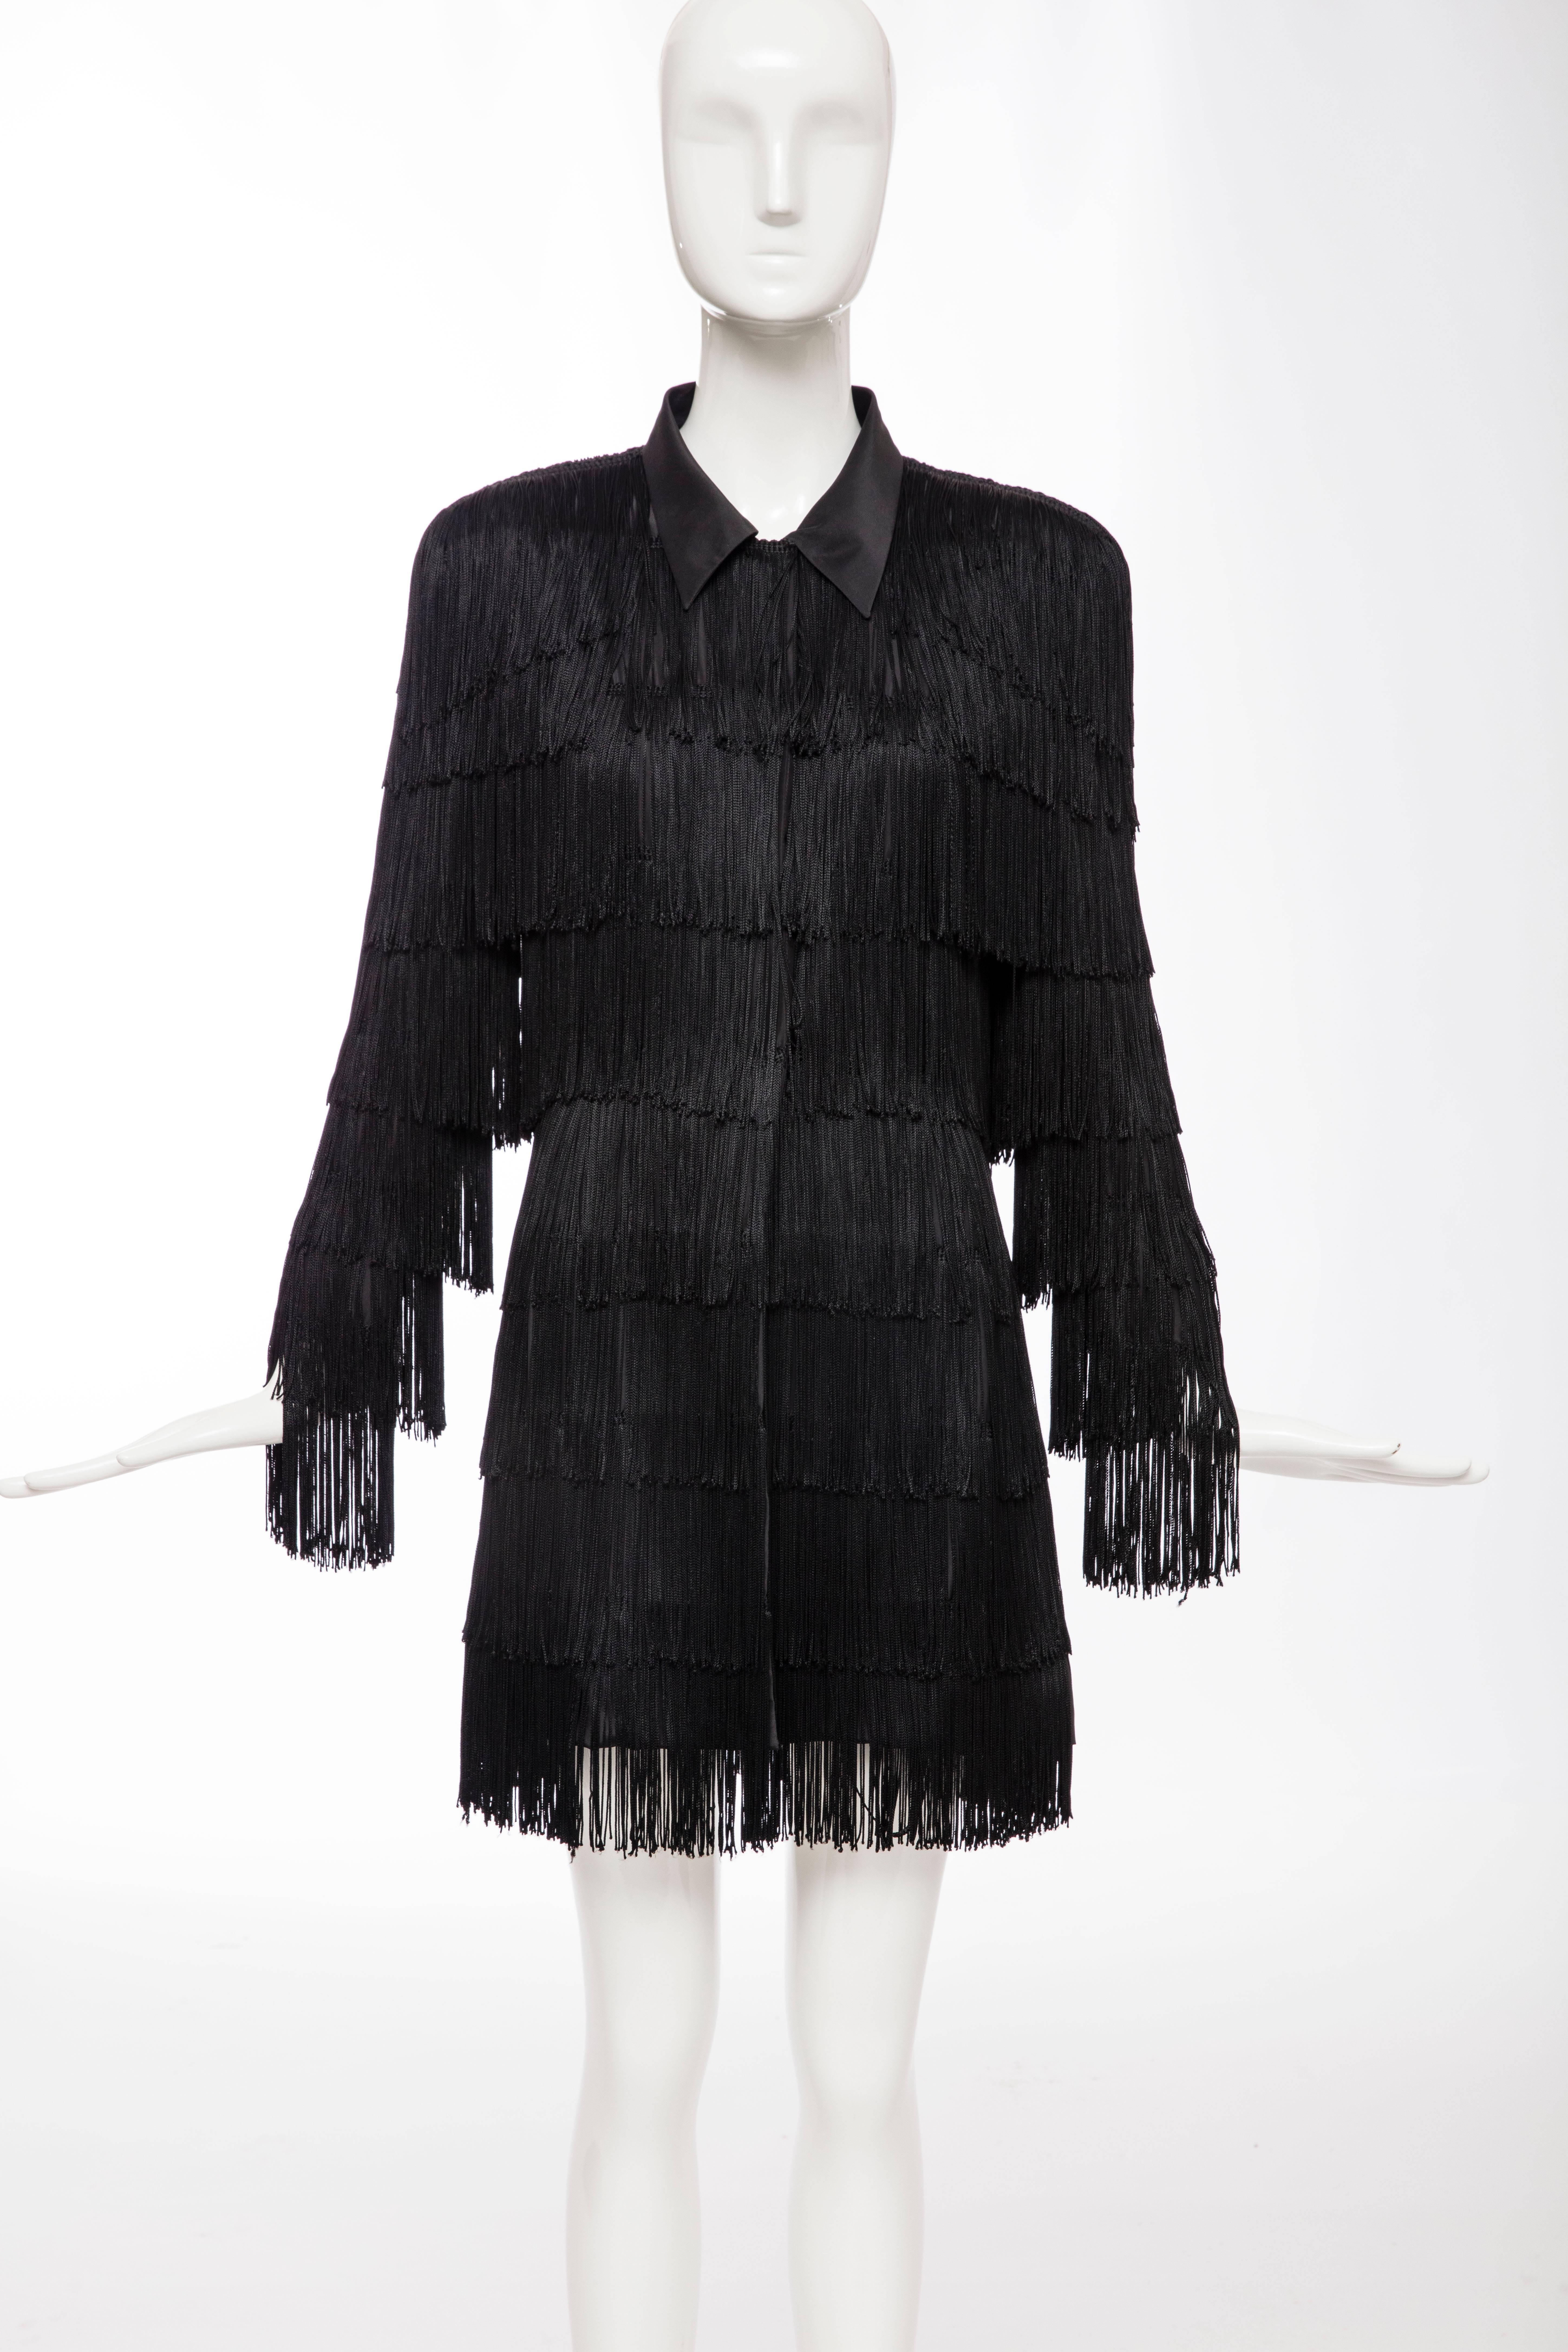 Norma Kamali OMO, circa 1980's, black fringe long jacket with front hidden button placket and hook-and-eye closure, shoulder pads and fully lined.

US. 6

Bust 38, Waist 32, Hips 38, Length 33.5